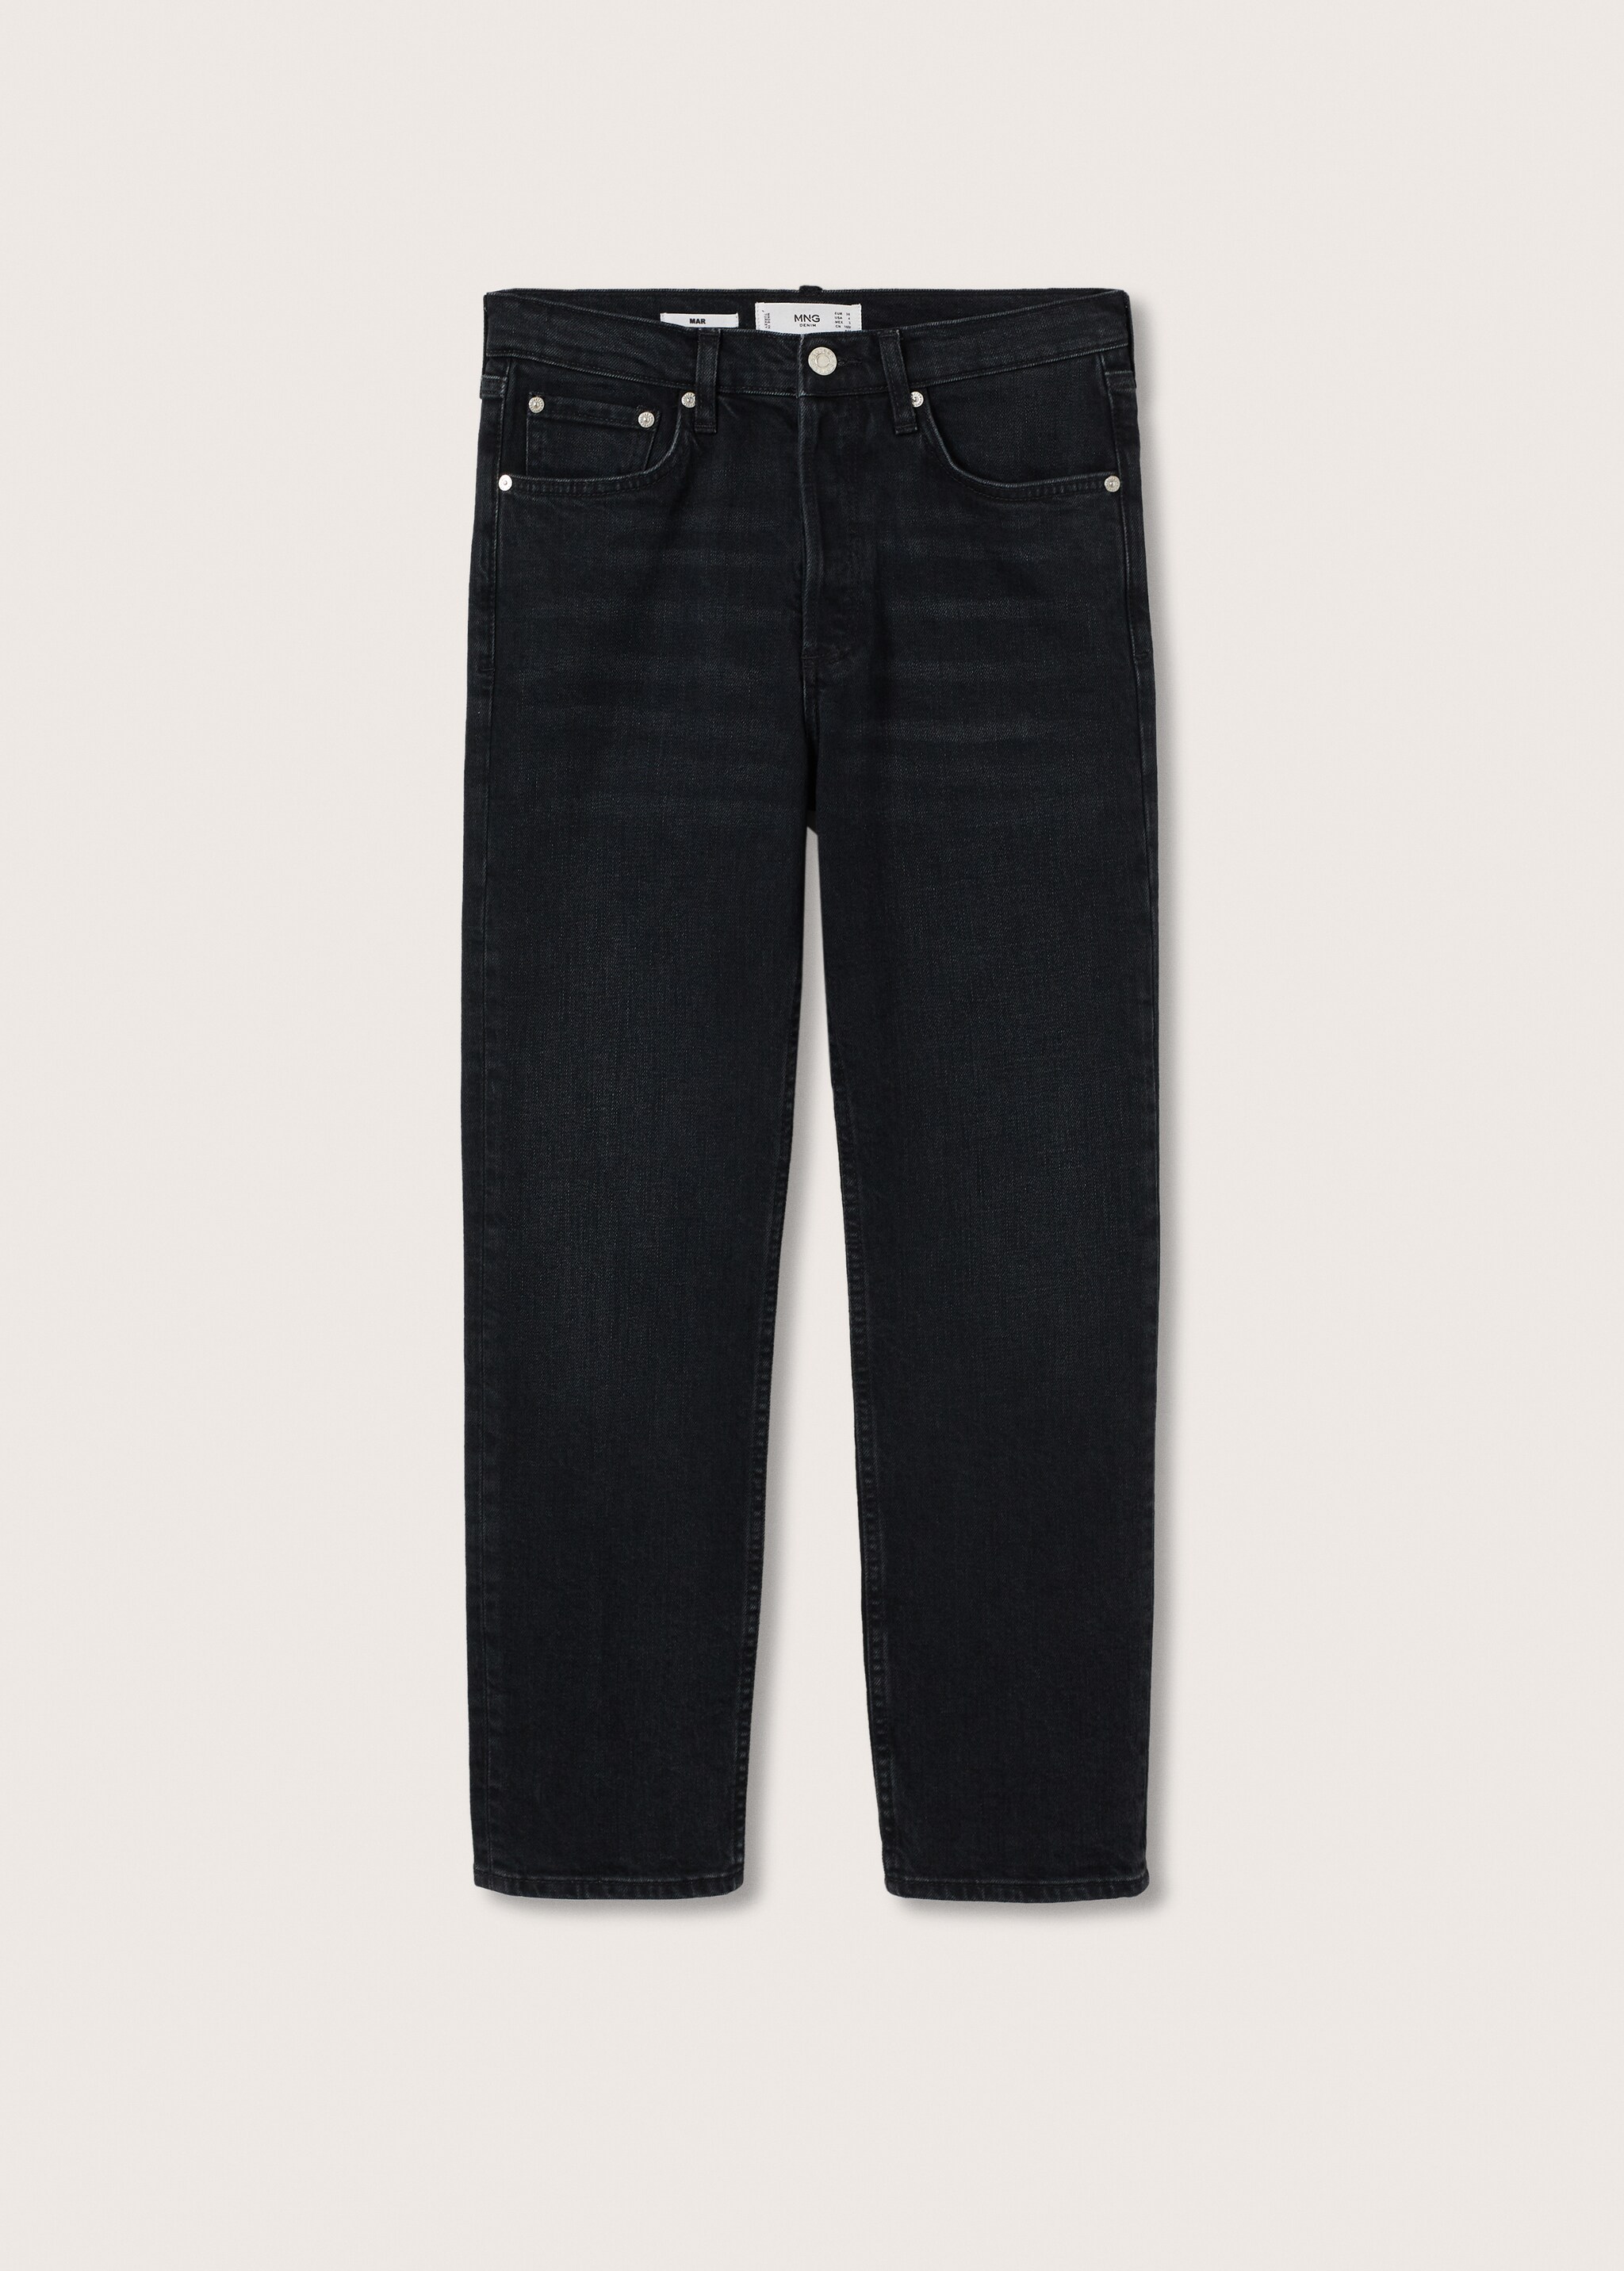 Slim mid-rise cropped jeans - Article without model